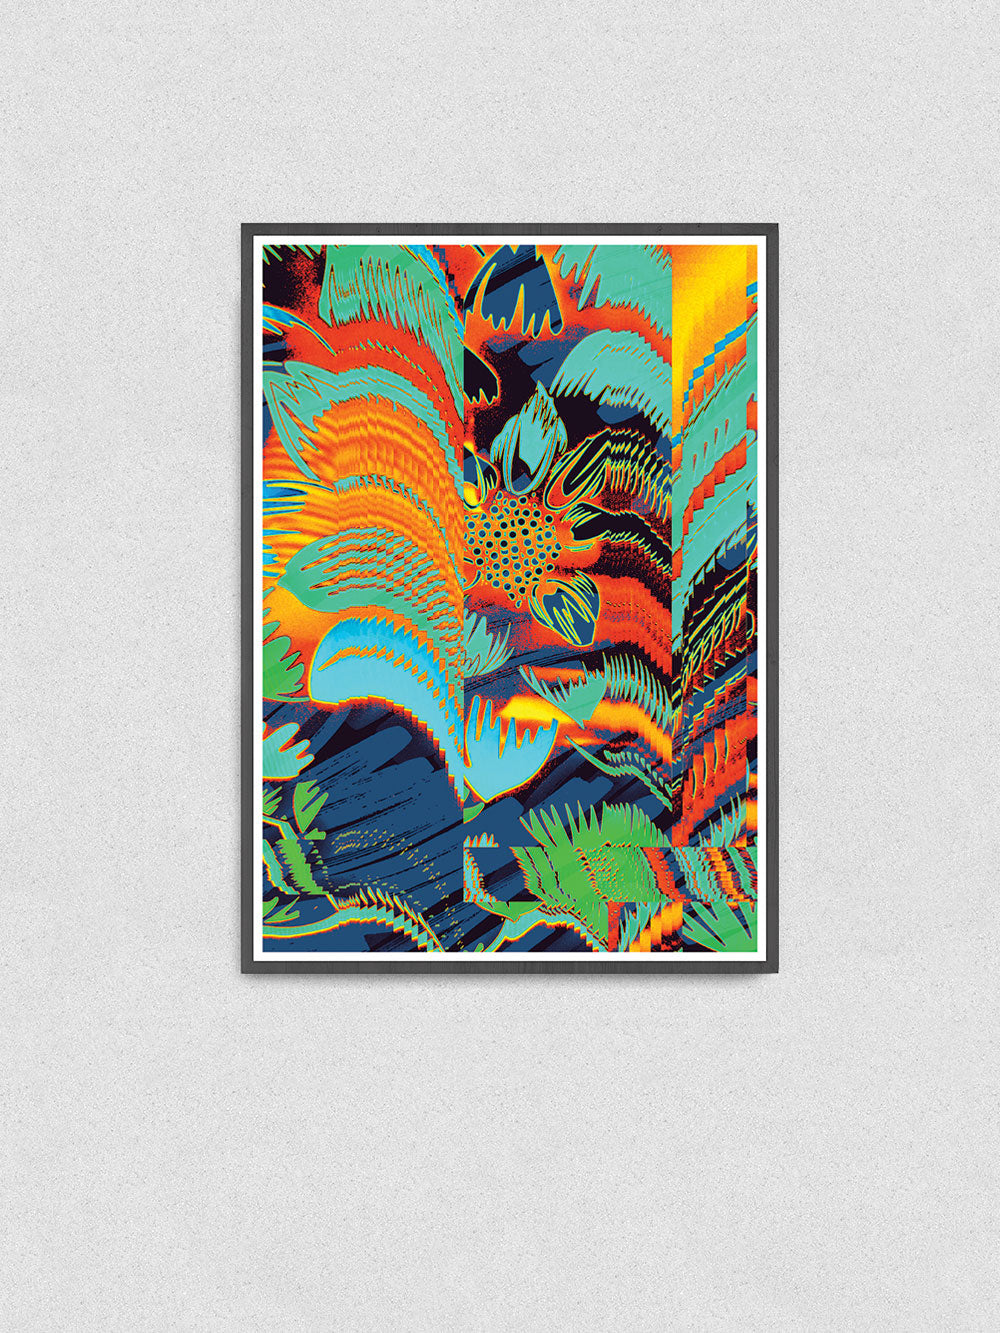 Floral Glitch Art Poster in a frame on a wall